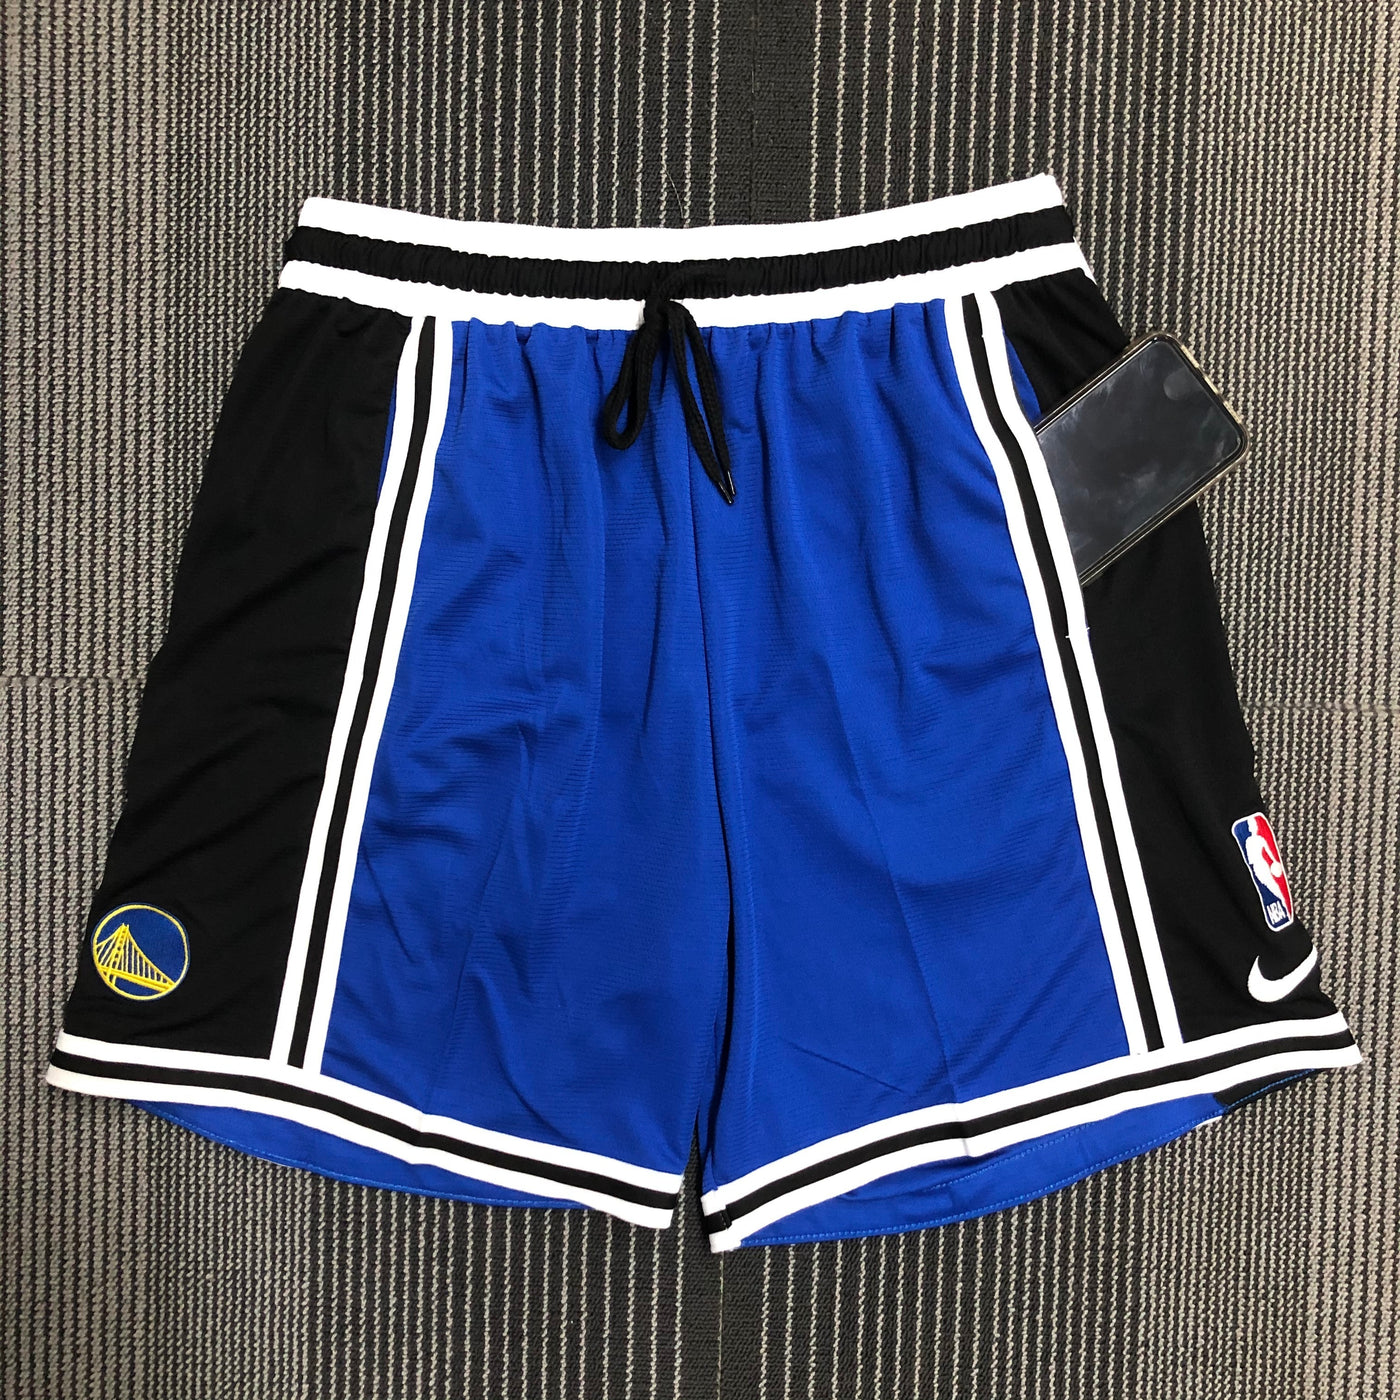 SHORTS Golden State Warriors Loose Fit